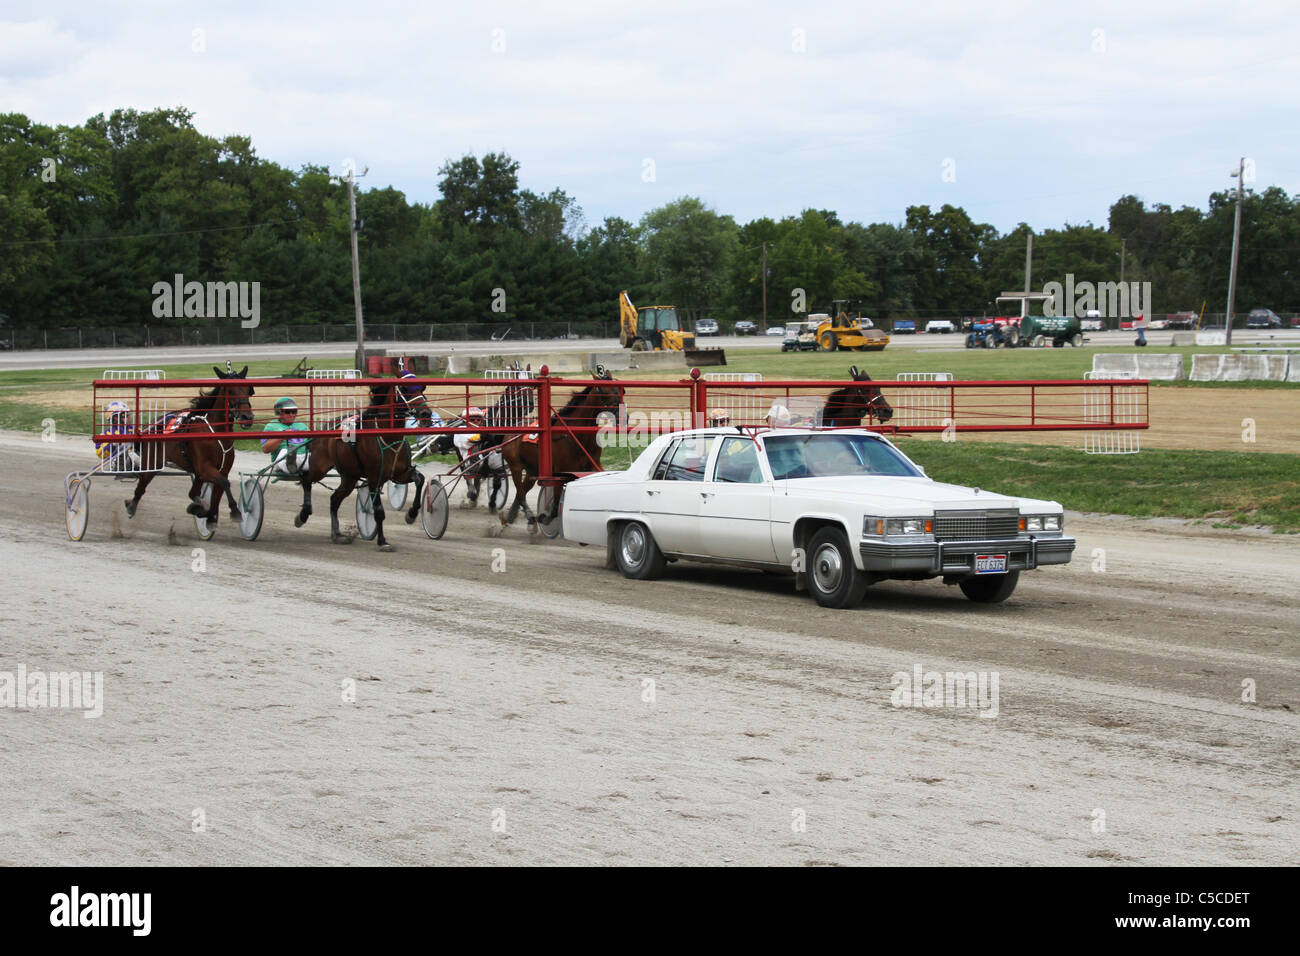 Starting Gate for Harness Racing. Horse Racing. Canfield Fair. Mahoning County Fair. Canfield, Ohio, USA. Stock Photo